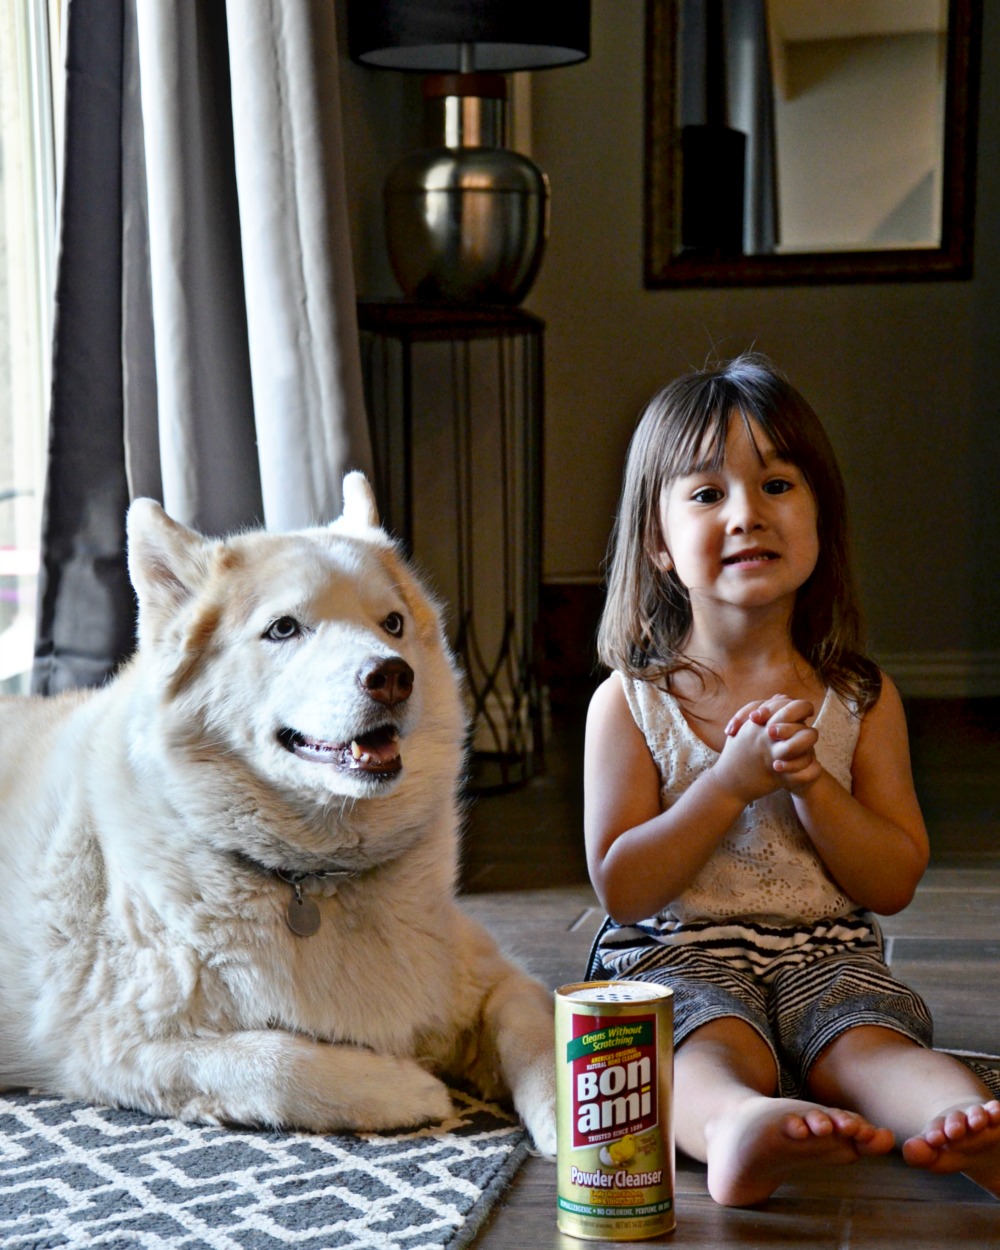 We use Bon Ami in our home because it's a nontoxic cleanser you can be comfortable using around kids and pets.